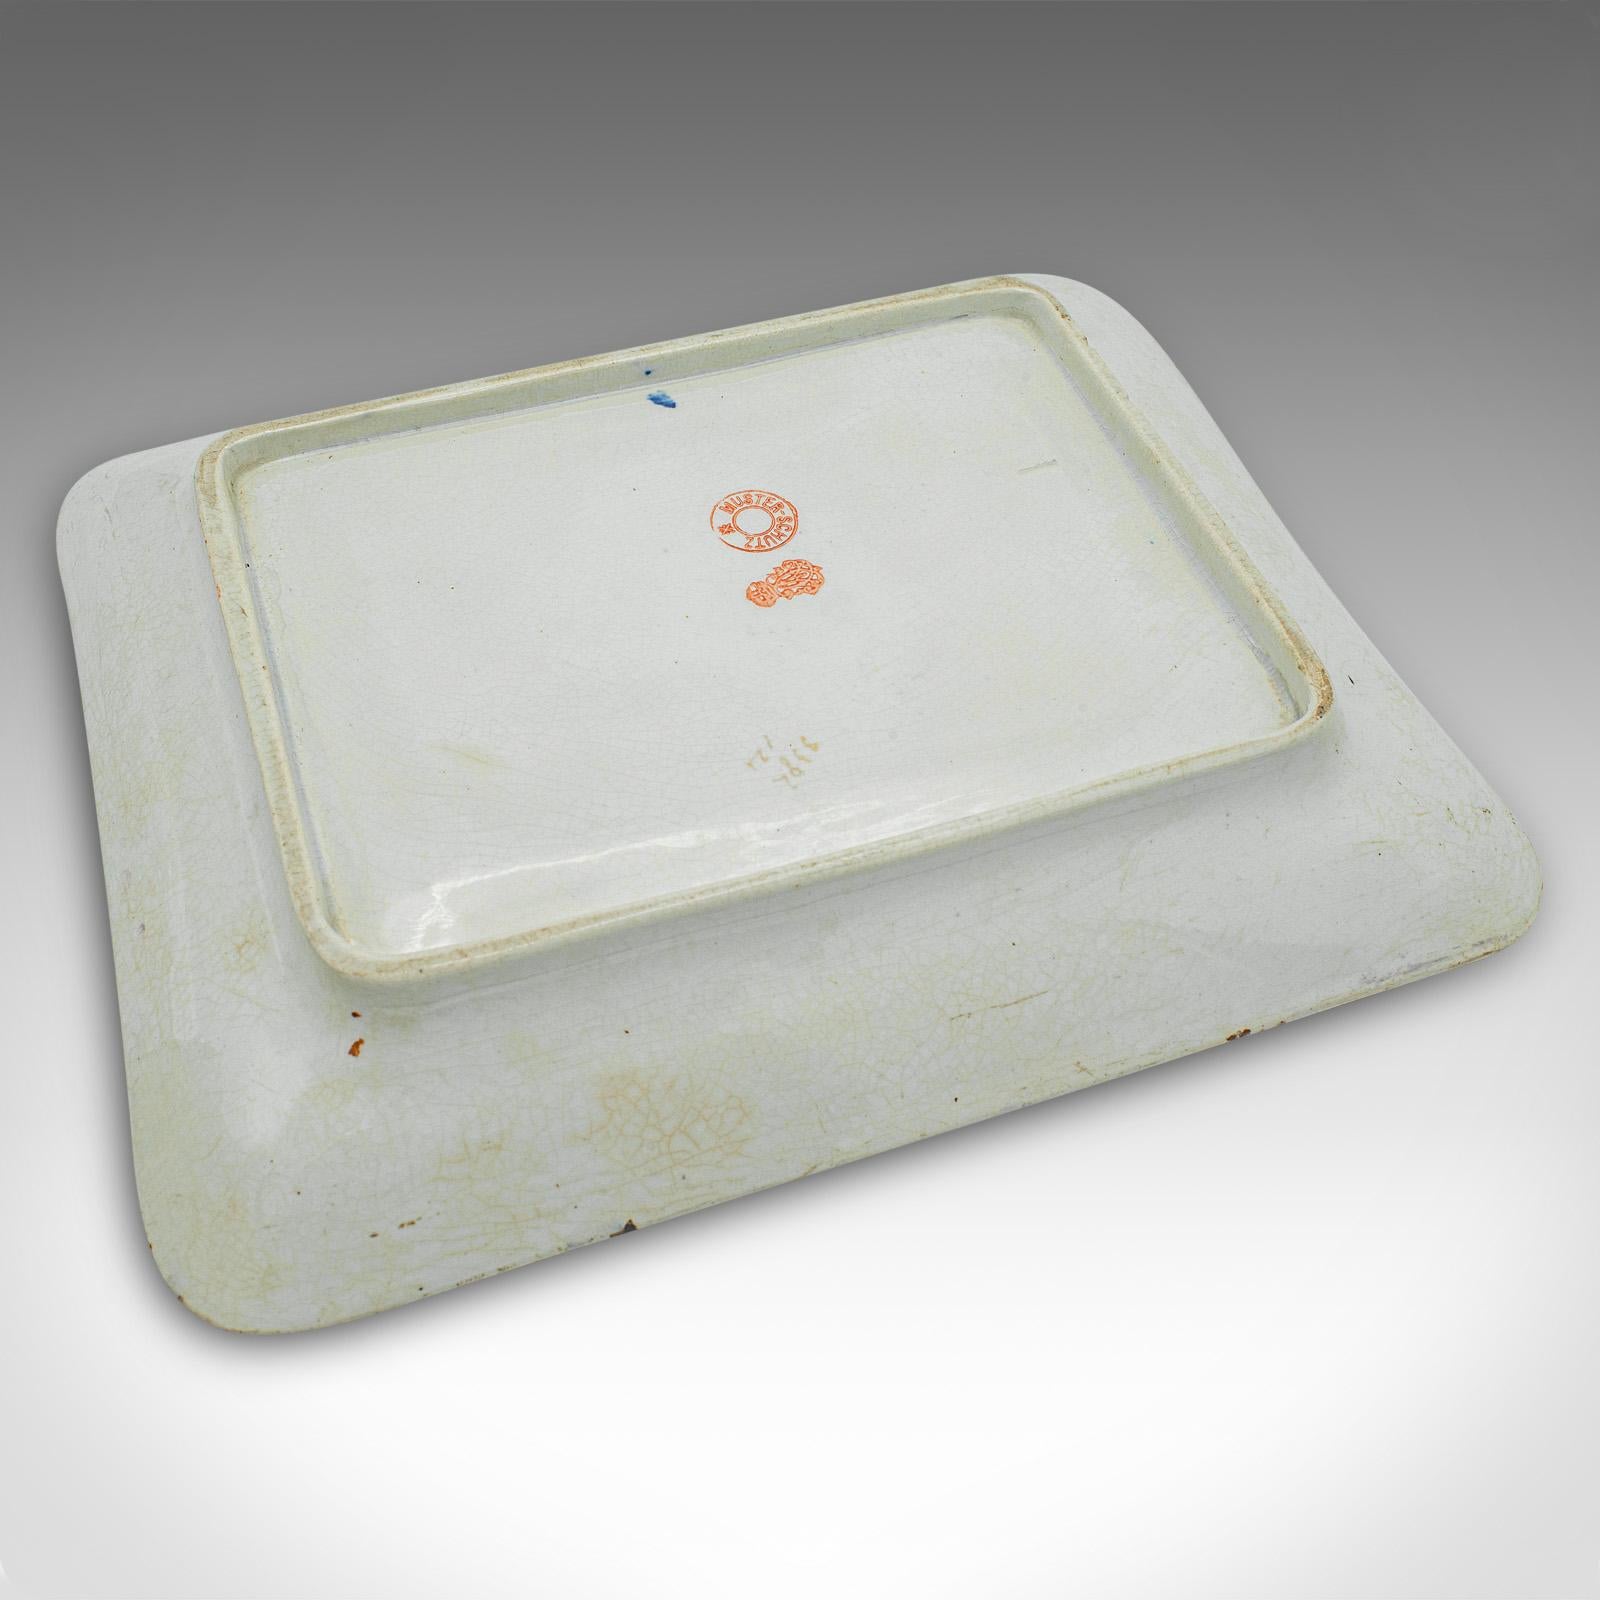 Antique Cheese Keeper, German, Ceramic, Butter Dish, Ludwig Wessel, Victorian For Sale 5